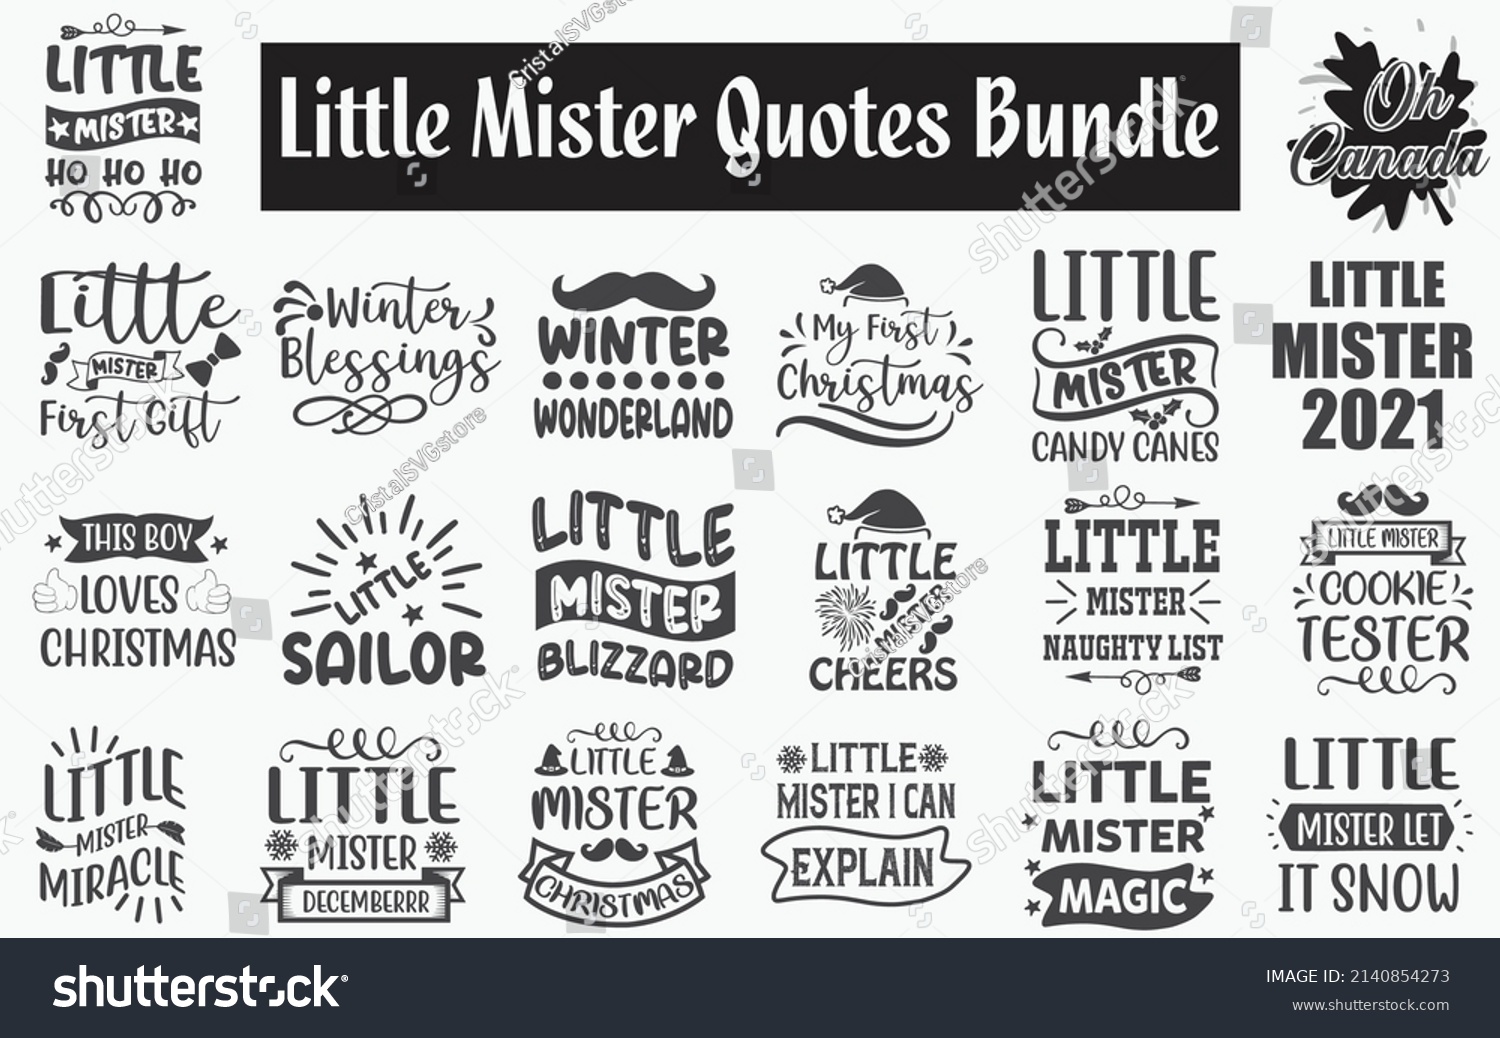 SVG of Little mister Quotes SVG Cut Files Designs Bundle. Little mister quotes SVG cut files, small player quotes t shirt designs, Saying about Little mister, Little mister Saying cut files, Teenage Saying  svg